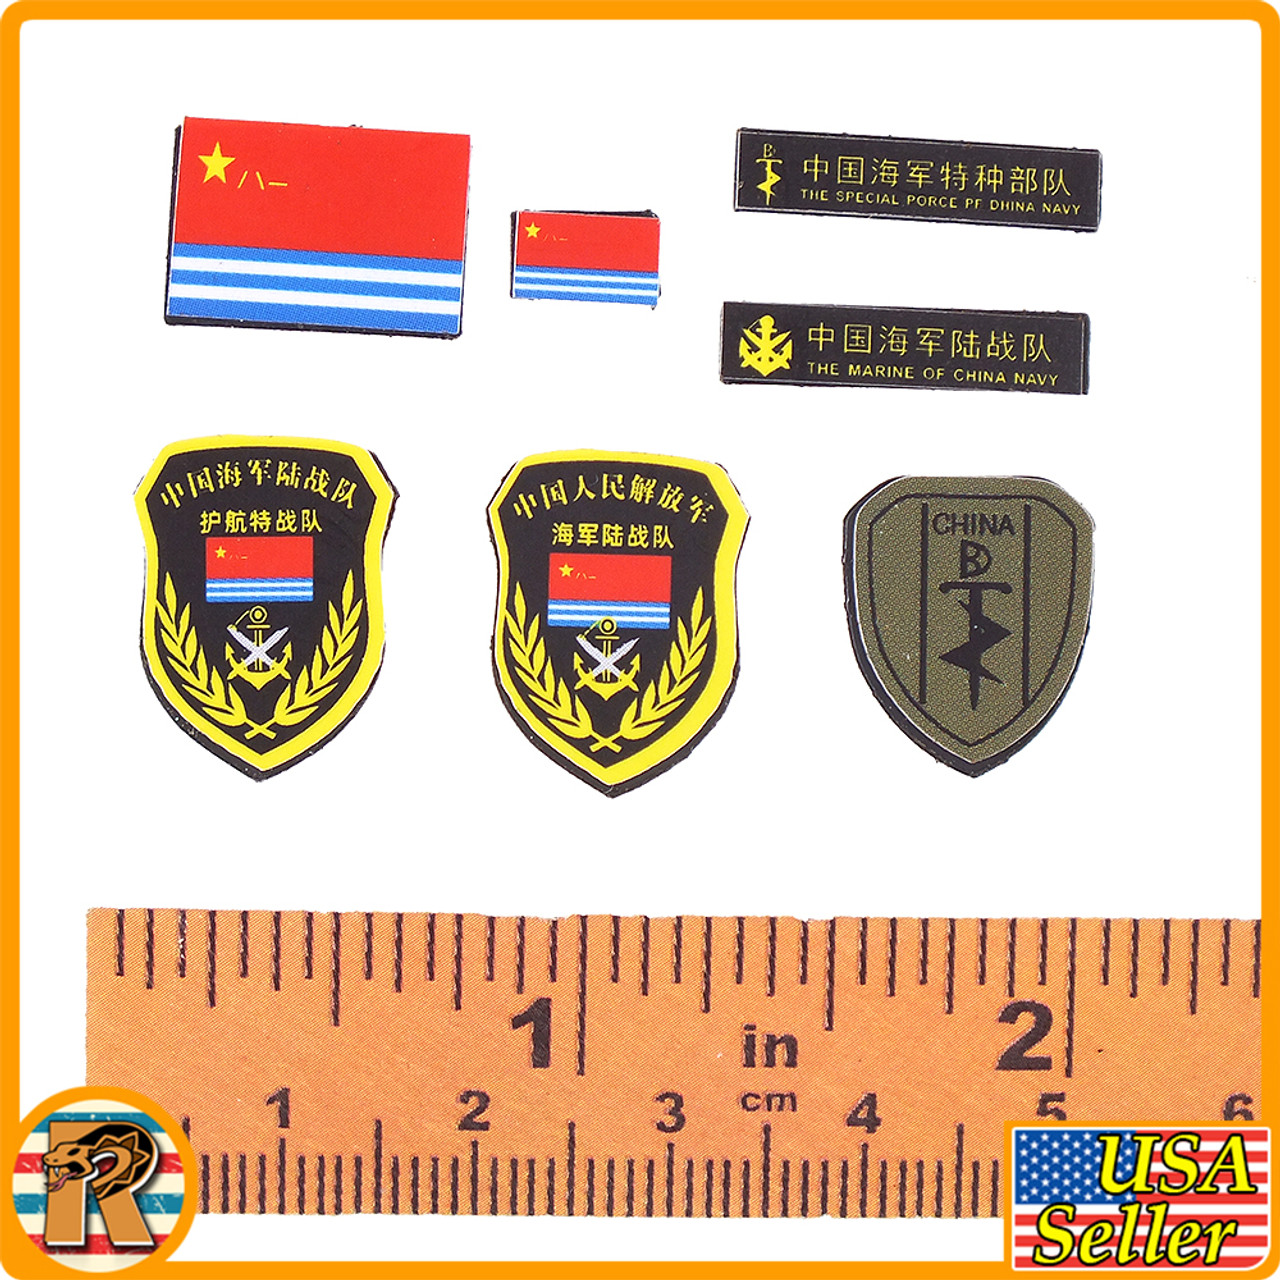 Marine China Navy - Patches - 1/6 Scale -